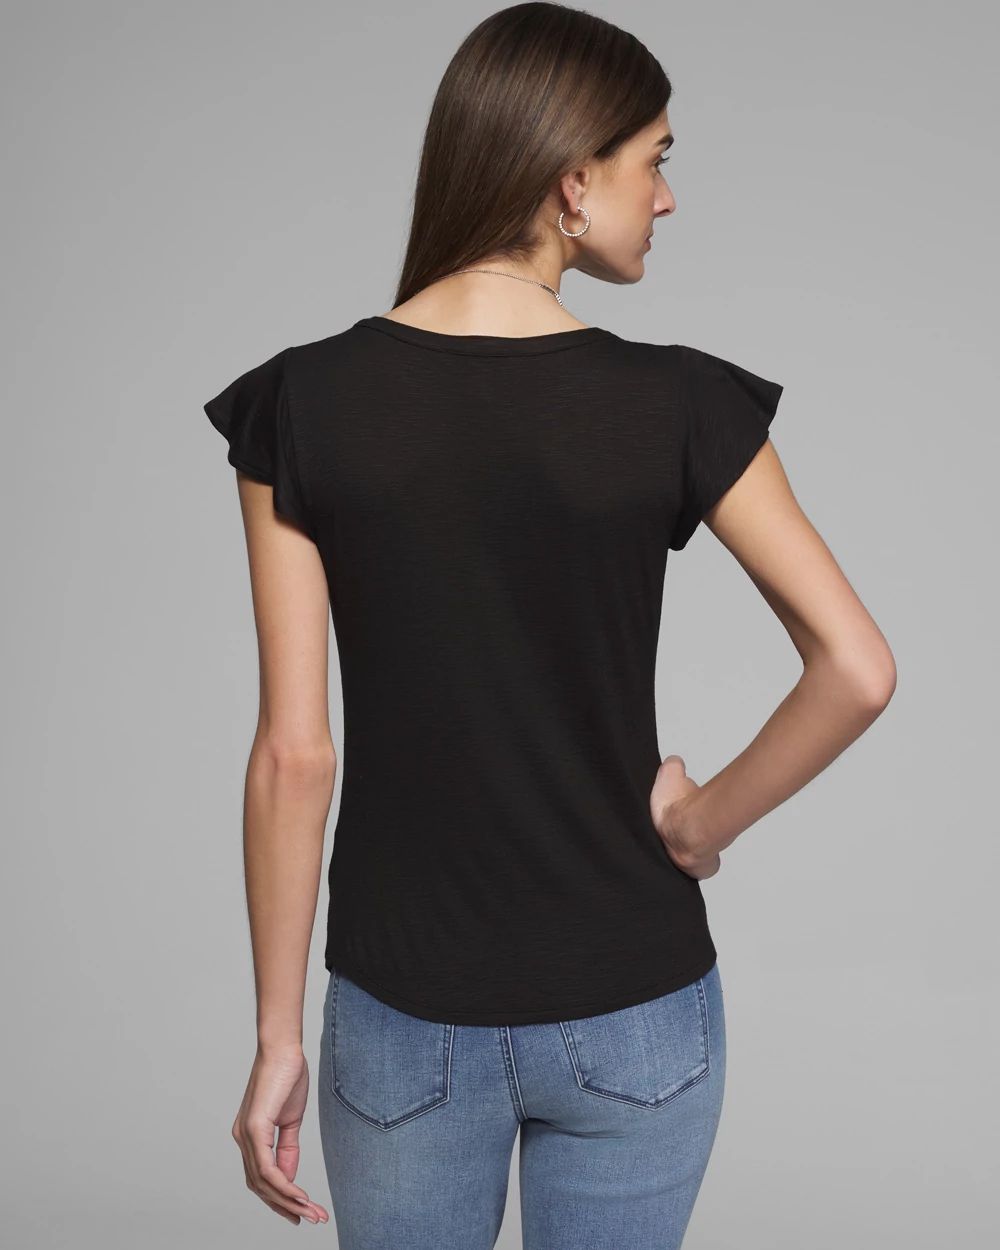 Outlet WHBM Ruffle Tee click to view larger image.